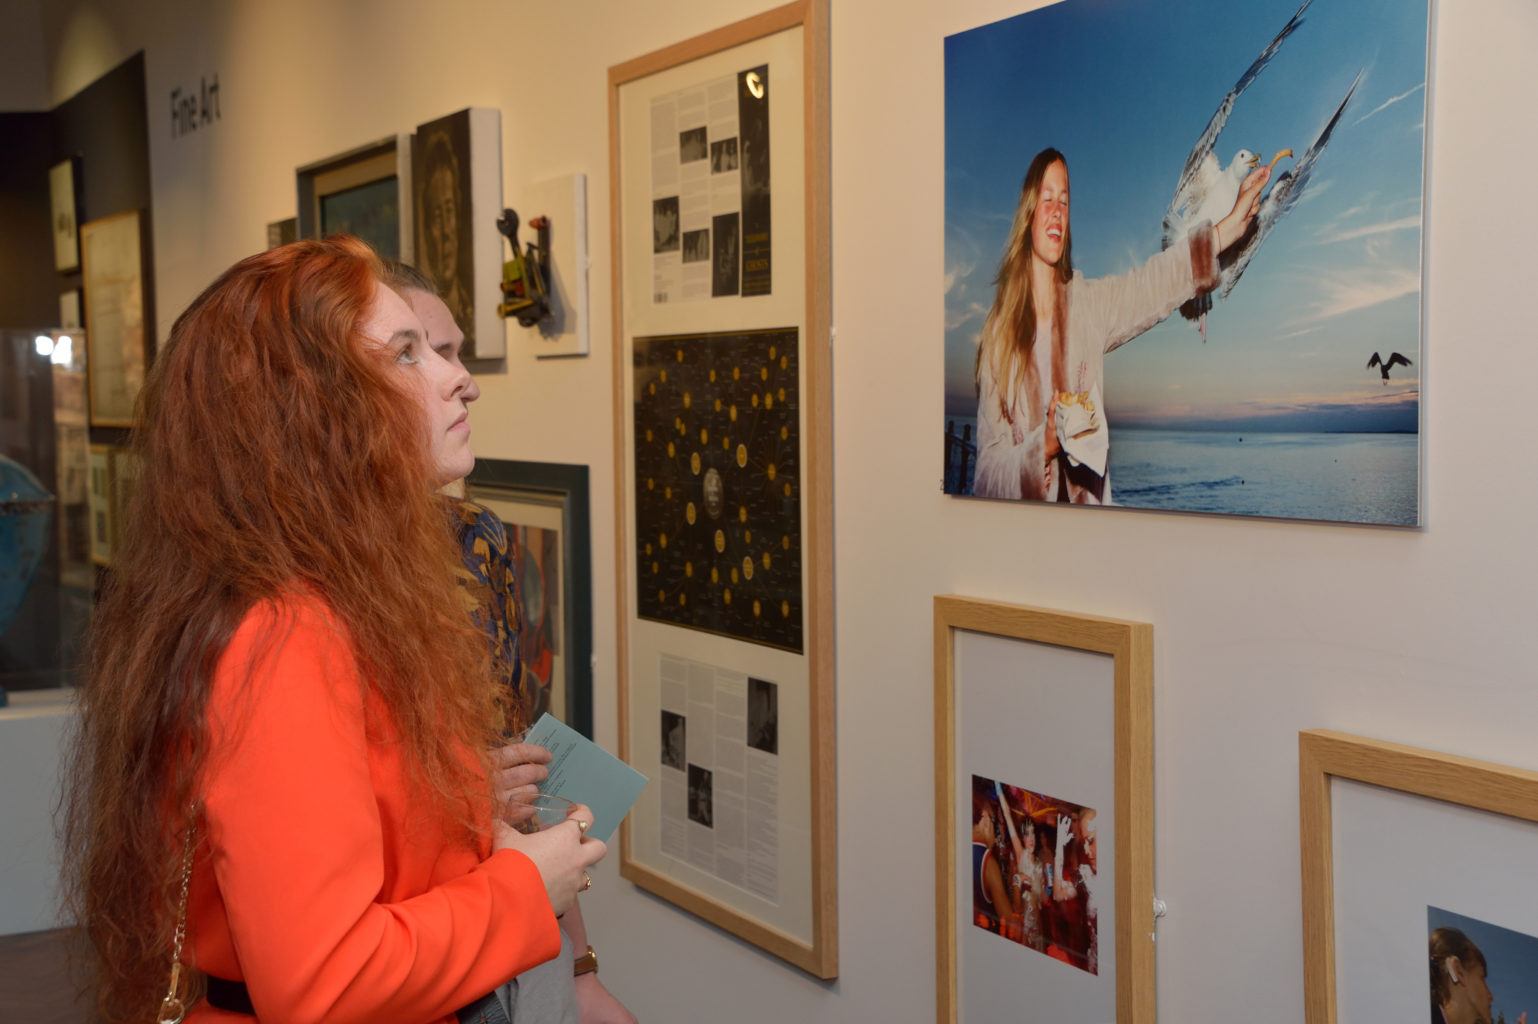 University of Bolton school of arts commemorative show launches at museum